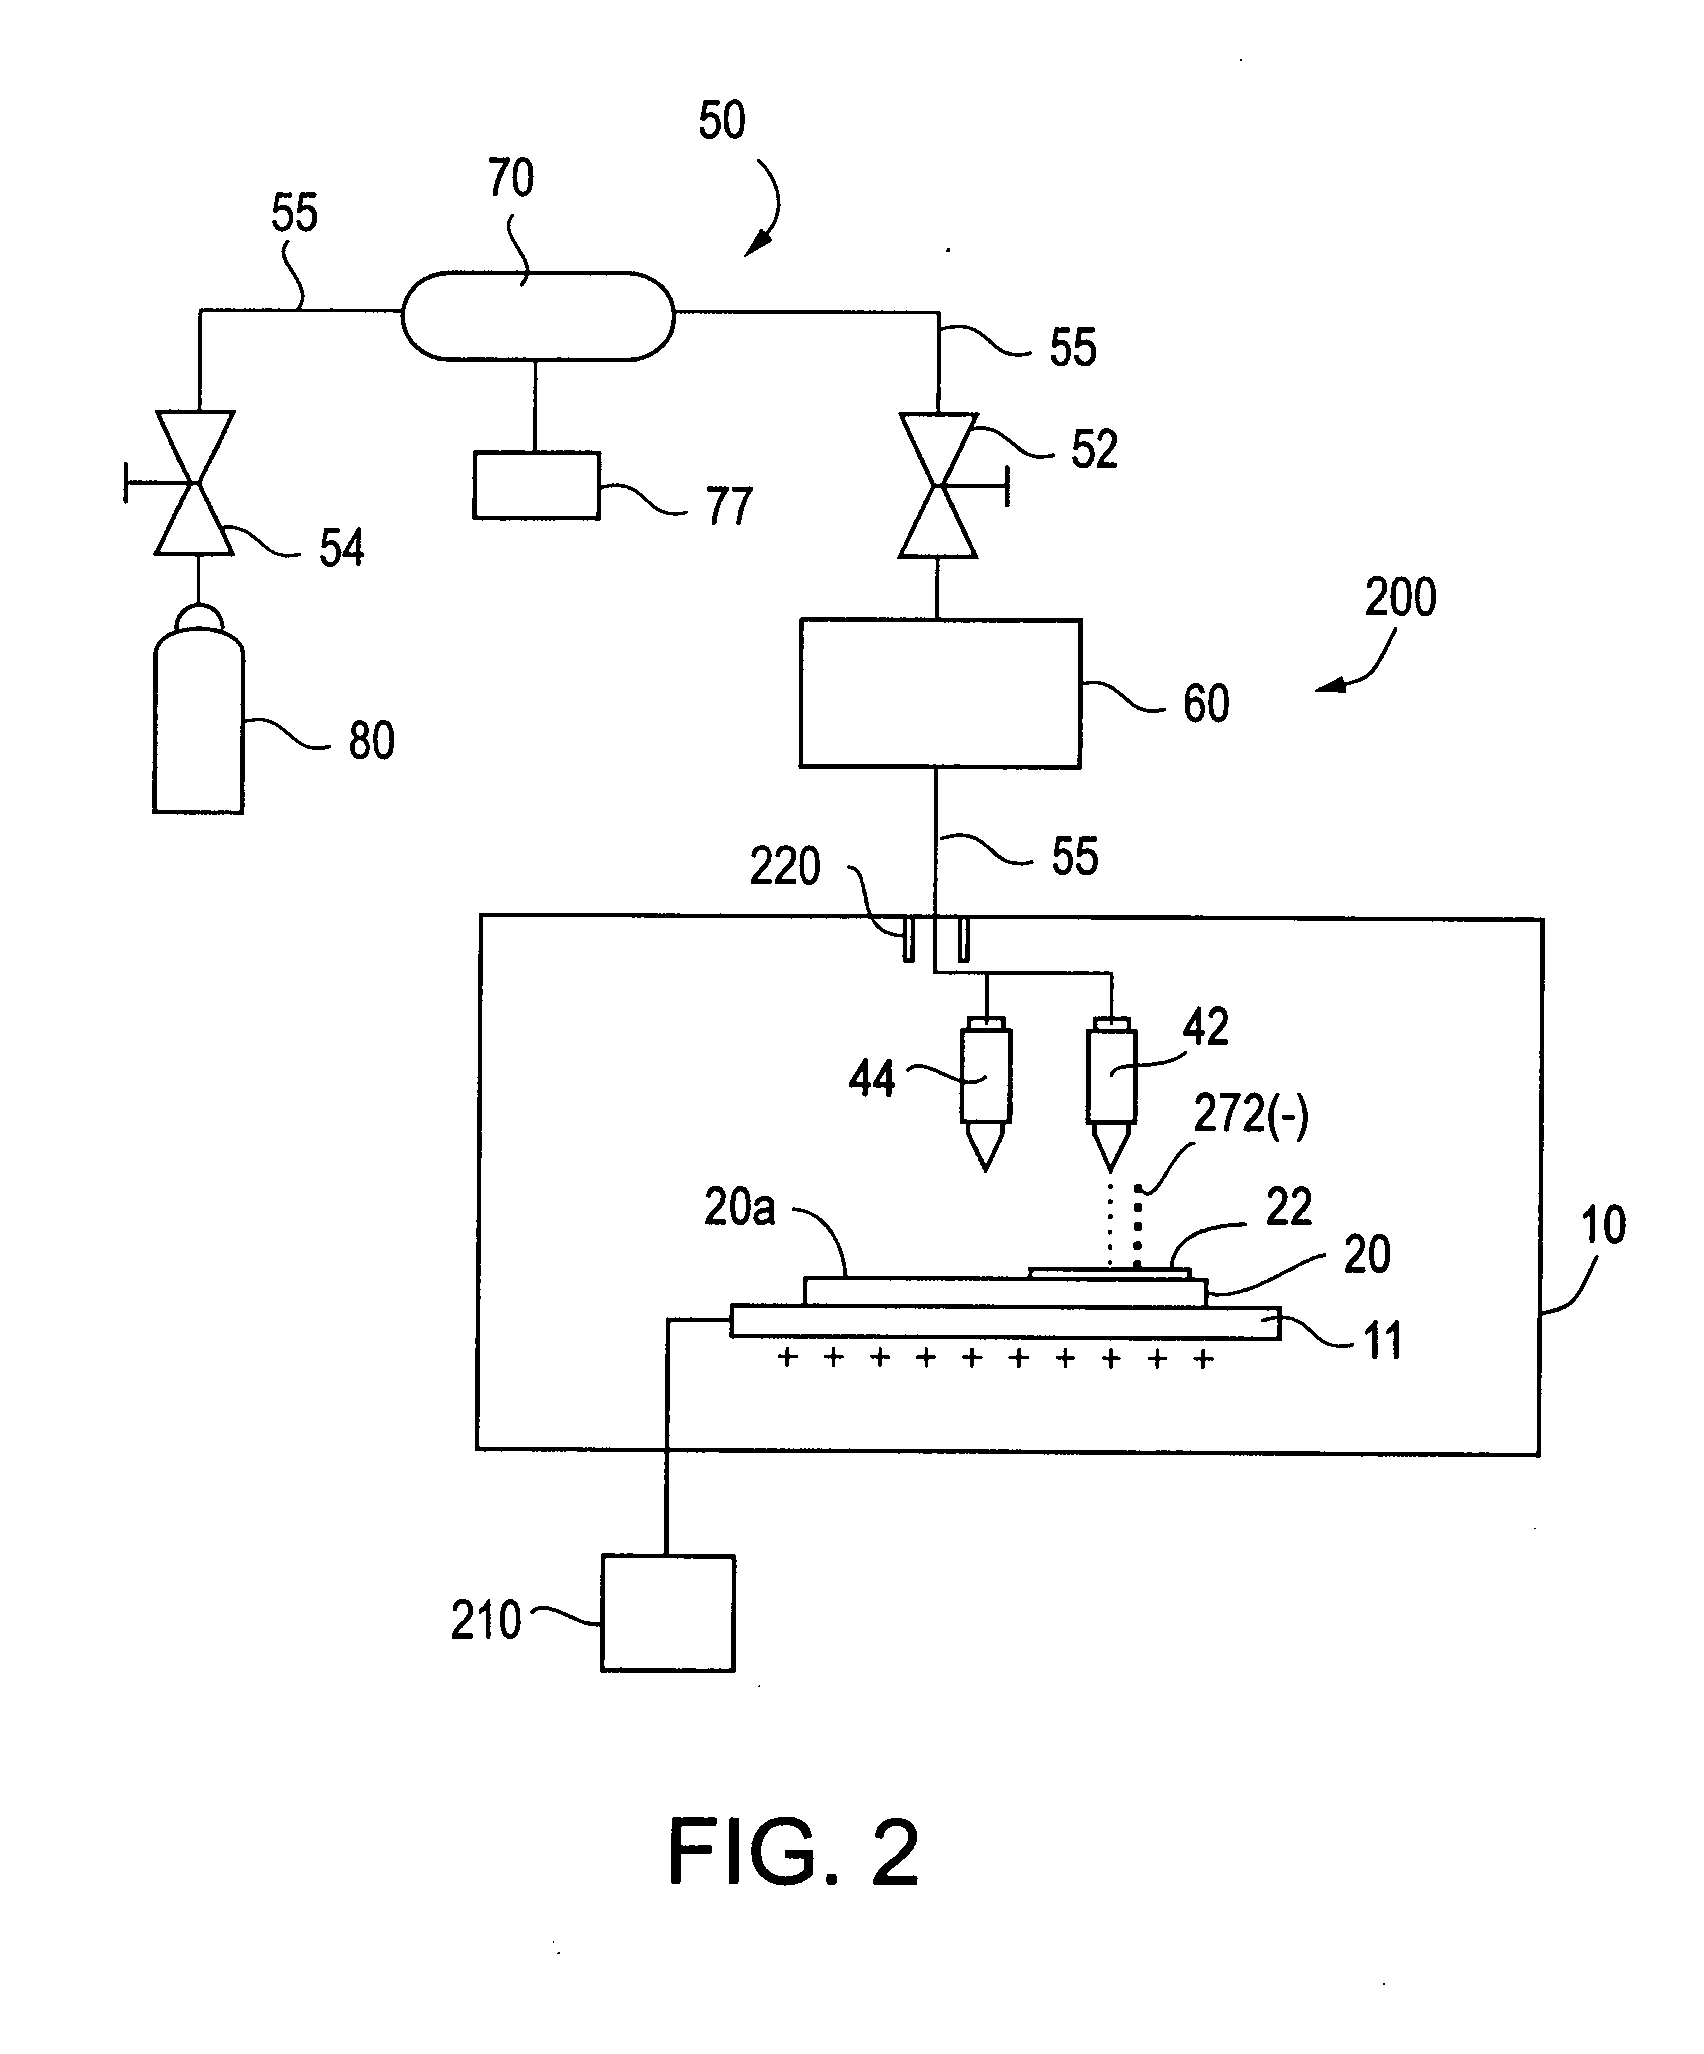 Supercritical fluid-assisted direct write for printing integrated circuits